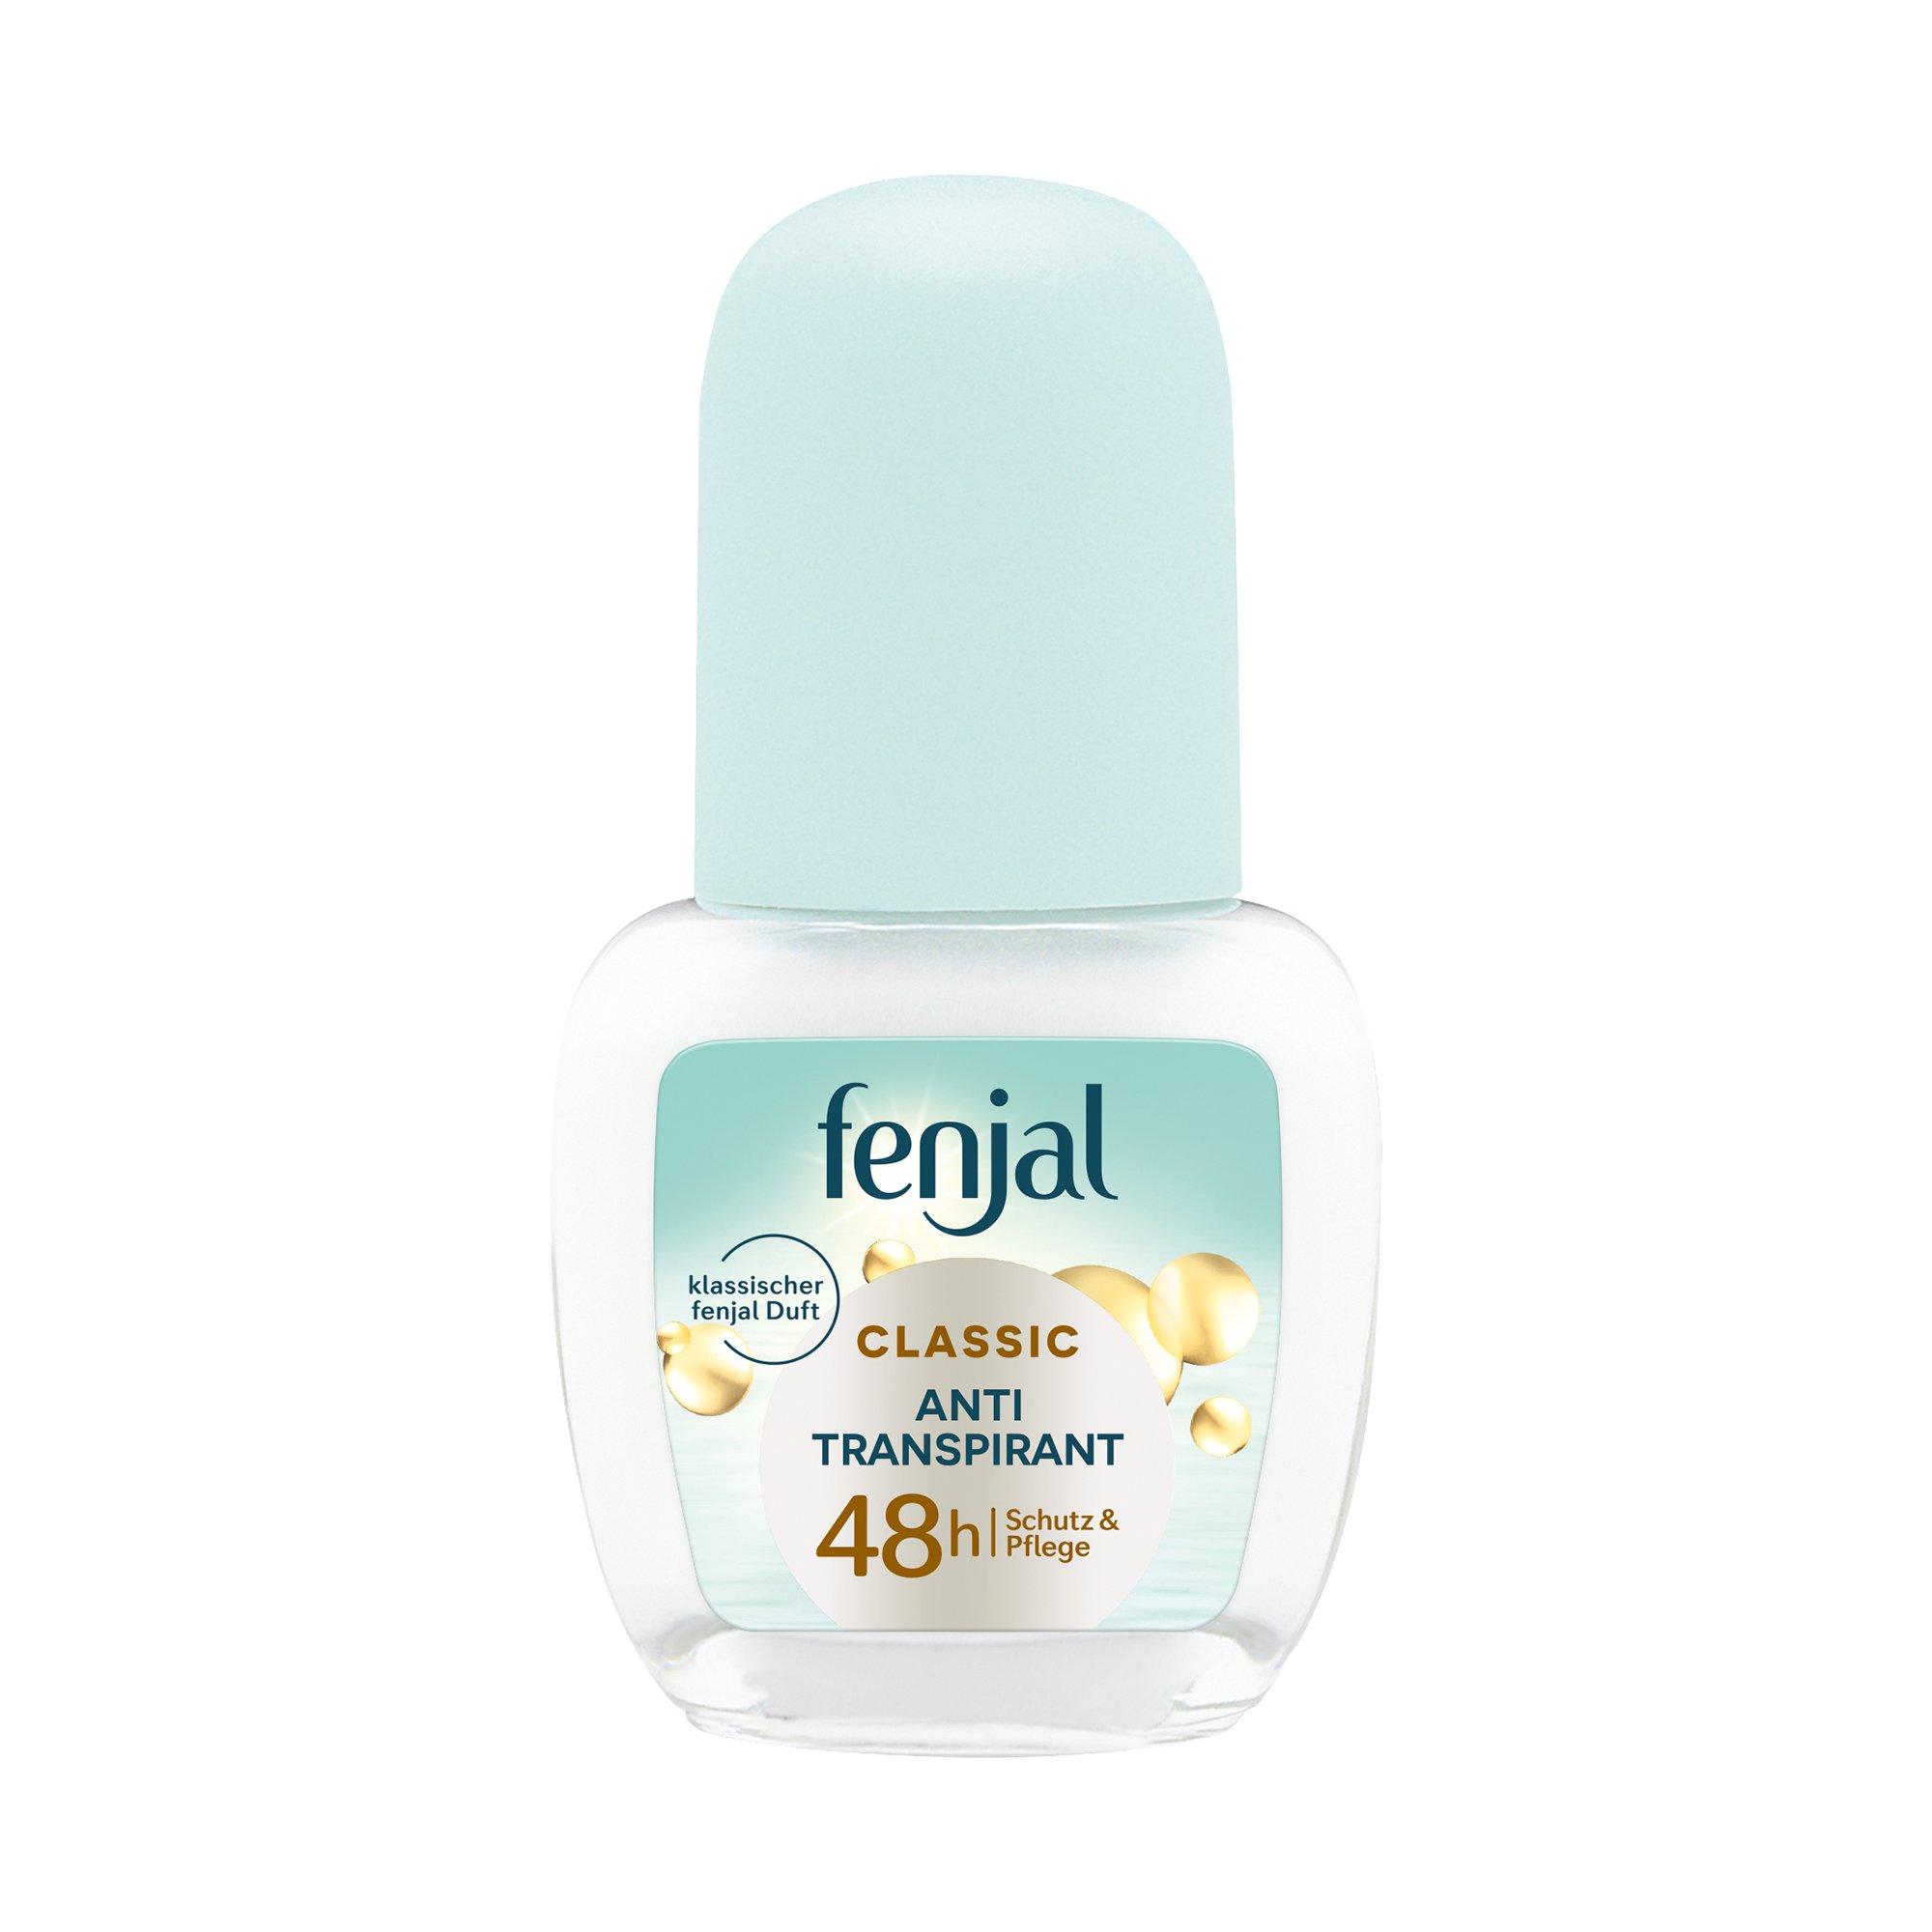 Image of fenjal Anti-Transpirant Roll-on Classic - 50ml